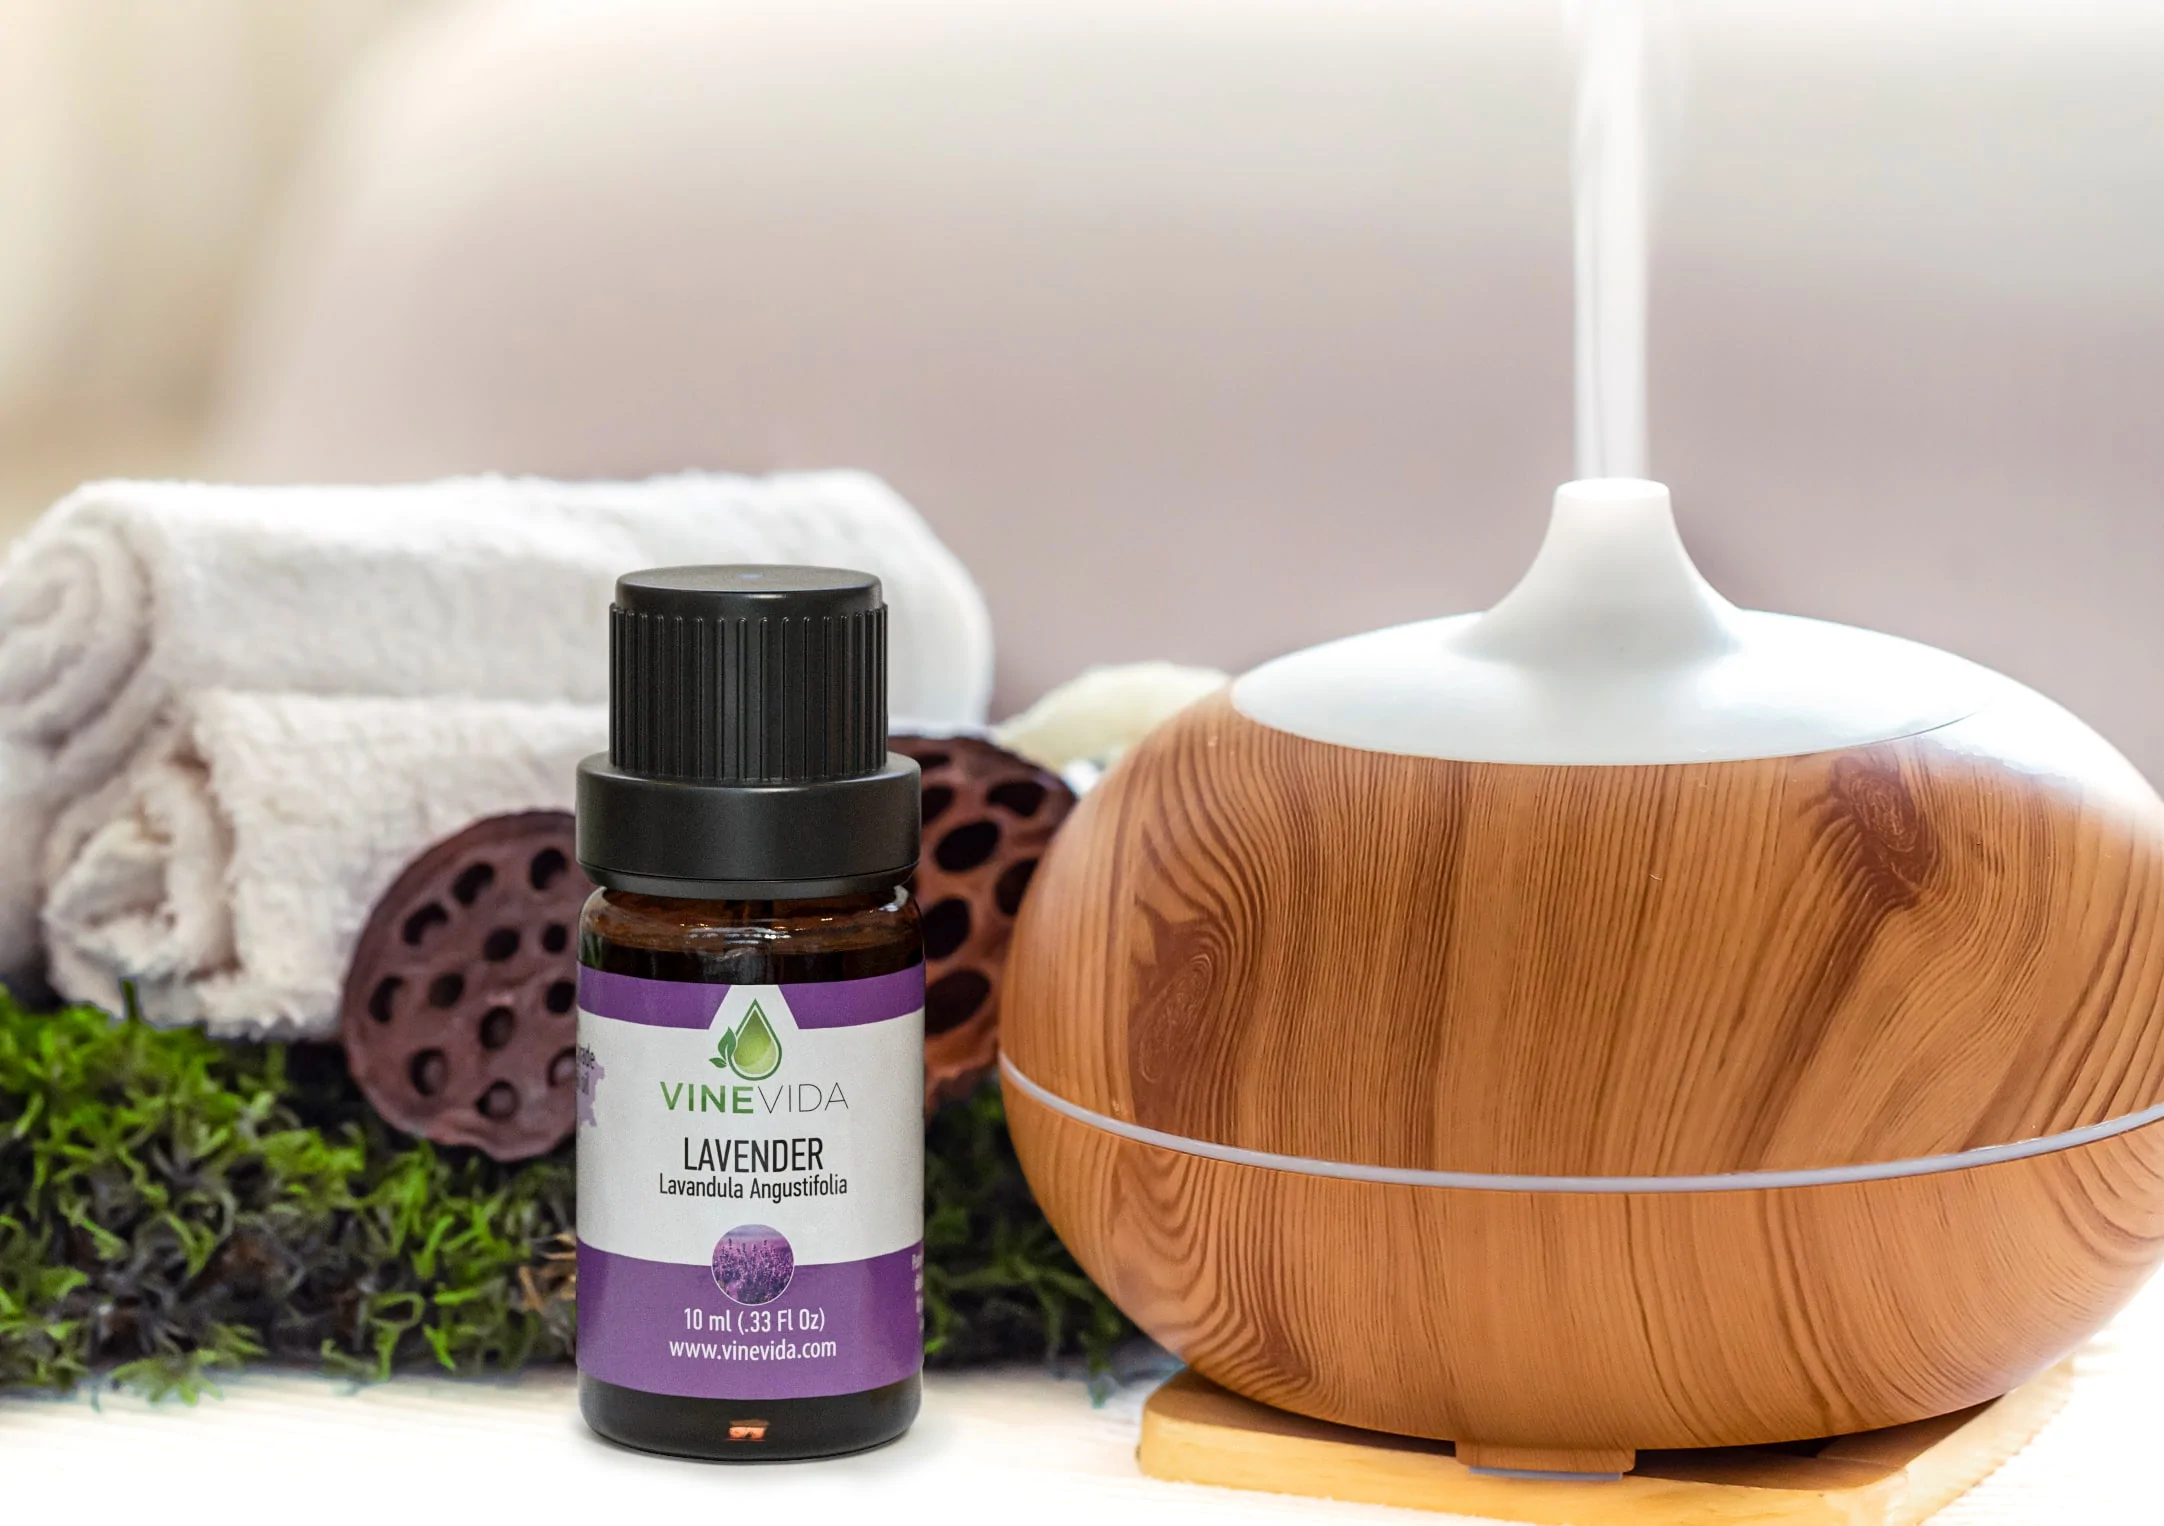 Best Humidifier For Essential Oils 2022